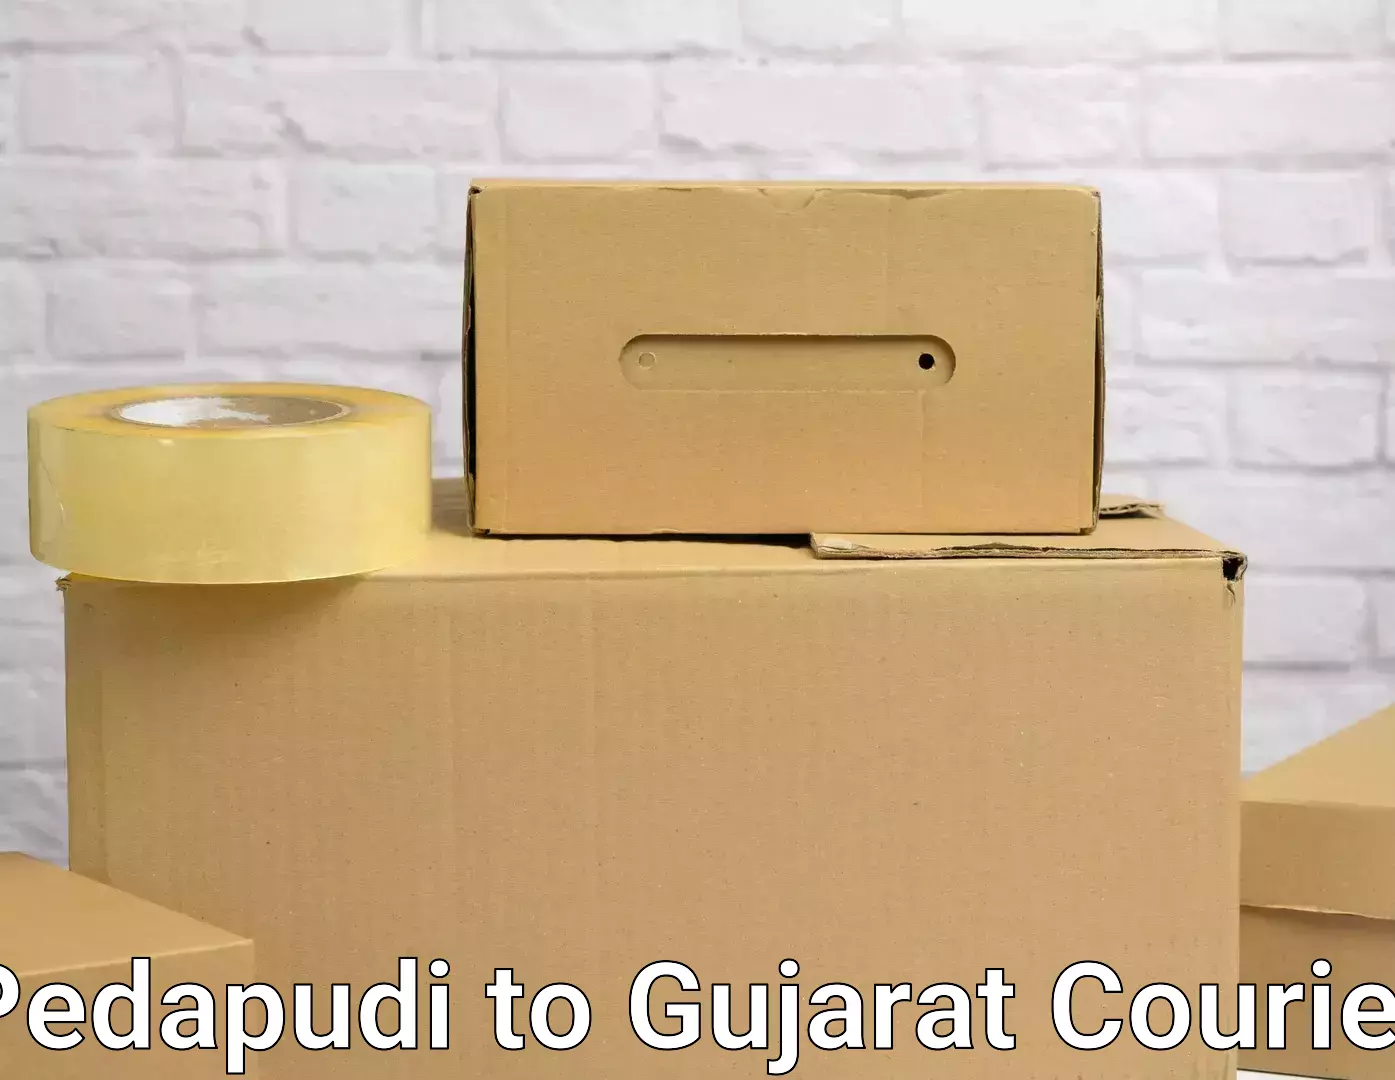 Efficient relocation services Pedapudi to Botad